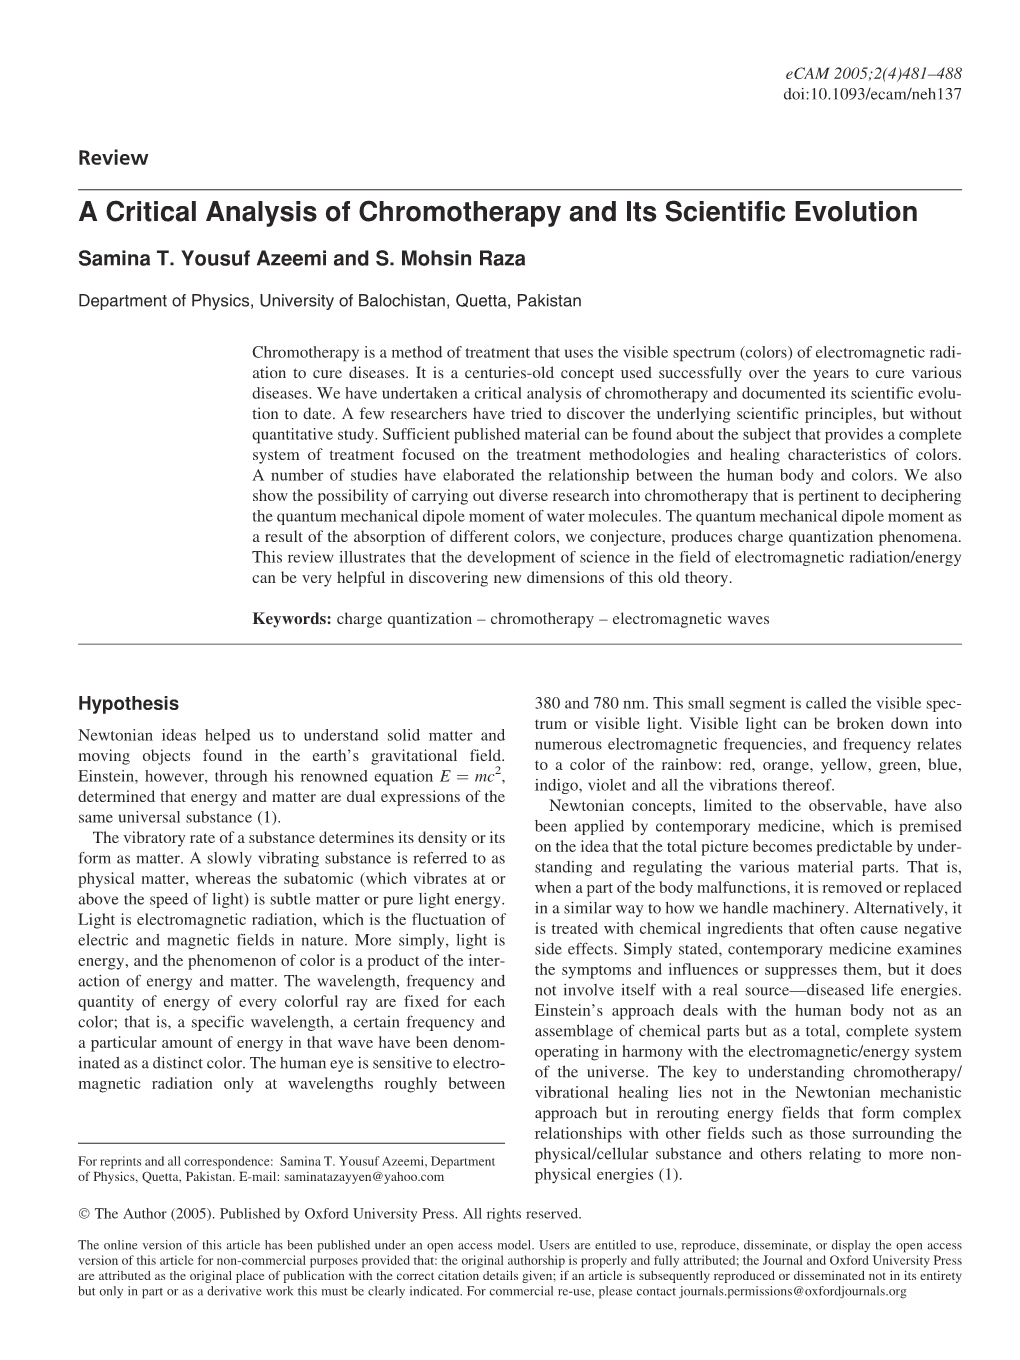 A Critical Analysis of Chromotherapy and Its Scientific Evolution